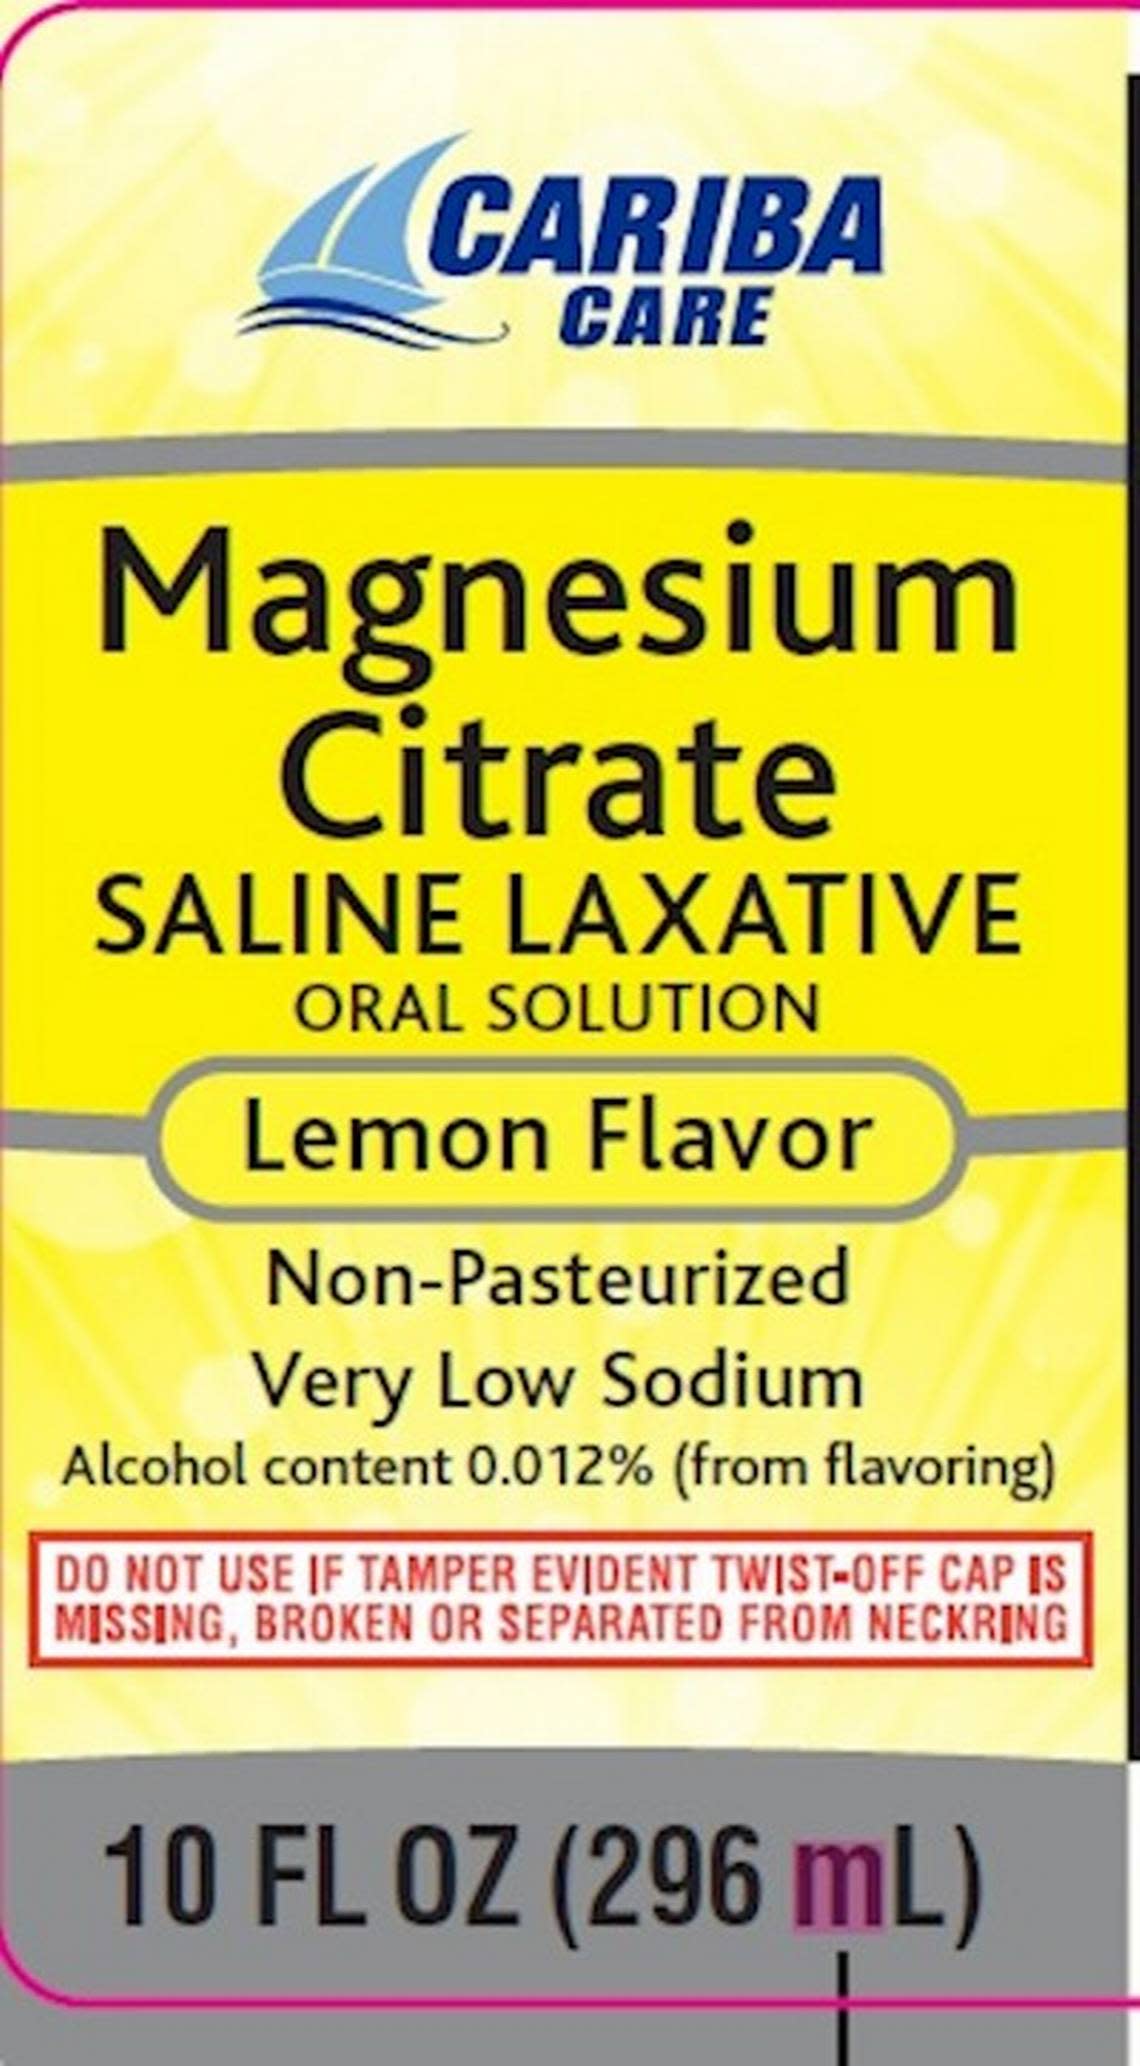 Cariba Care Magnesium Citrate laxative, distributed out of Safety Harbor, Florida